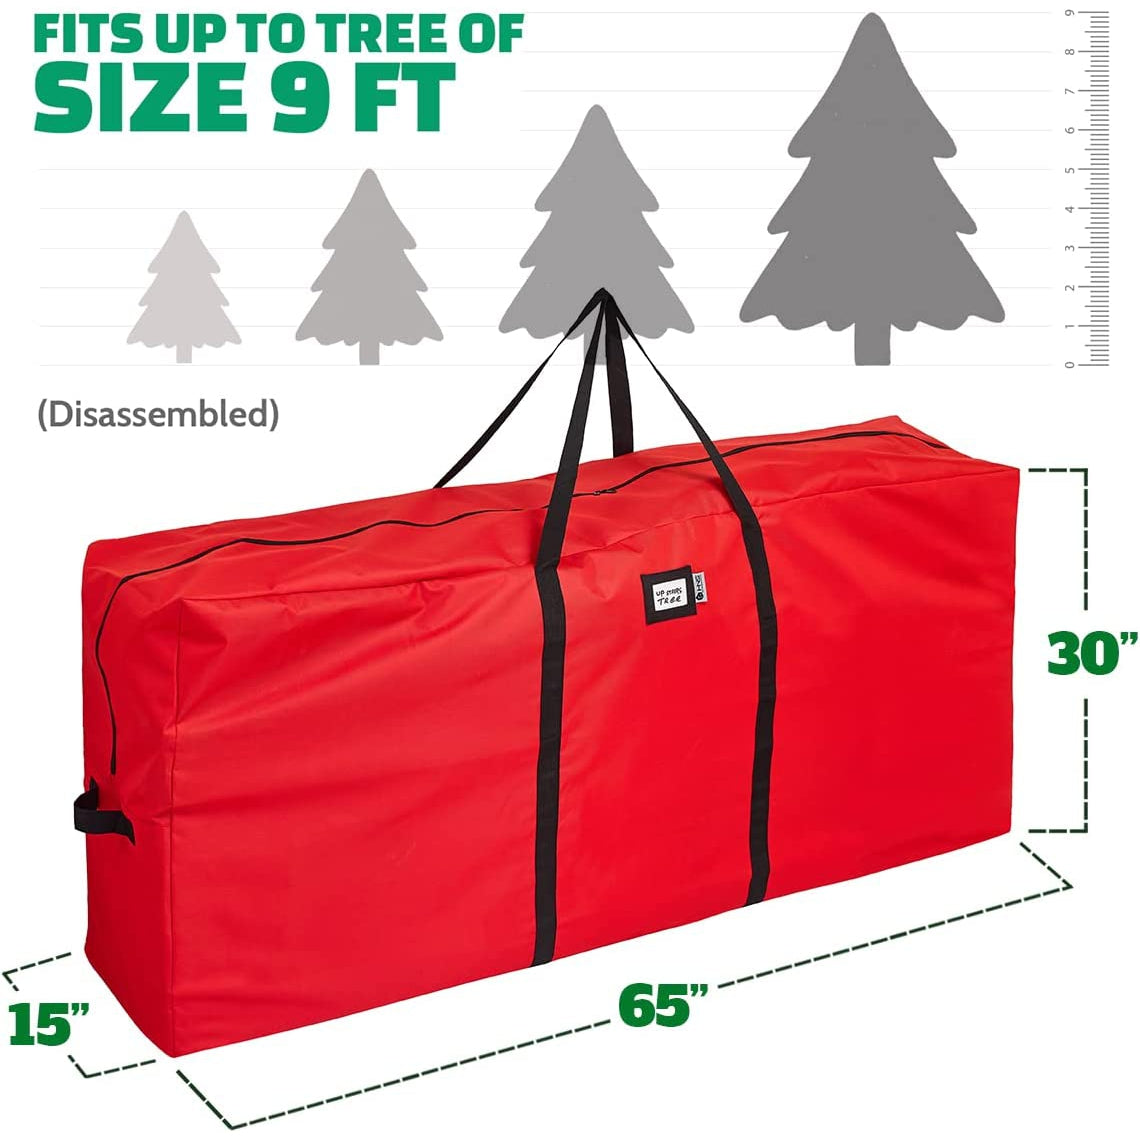 Christmas Tree Storage Bag - Fits up to 9 ft.- Waterproof Storage Bags 600D Oxford Material Tear-Resistant - Tote Bag with Dual Zippers and Reinforced Handles.